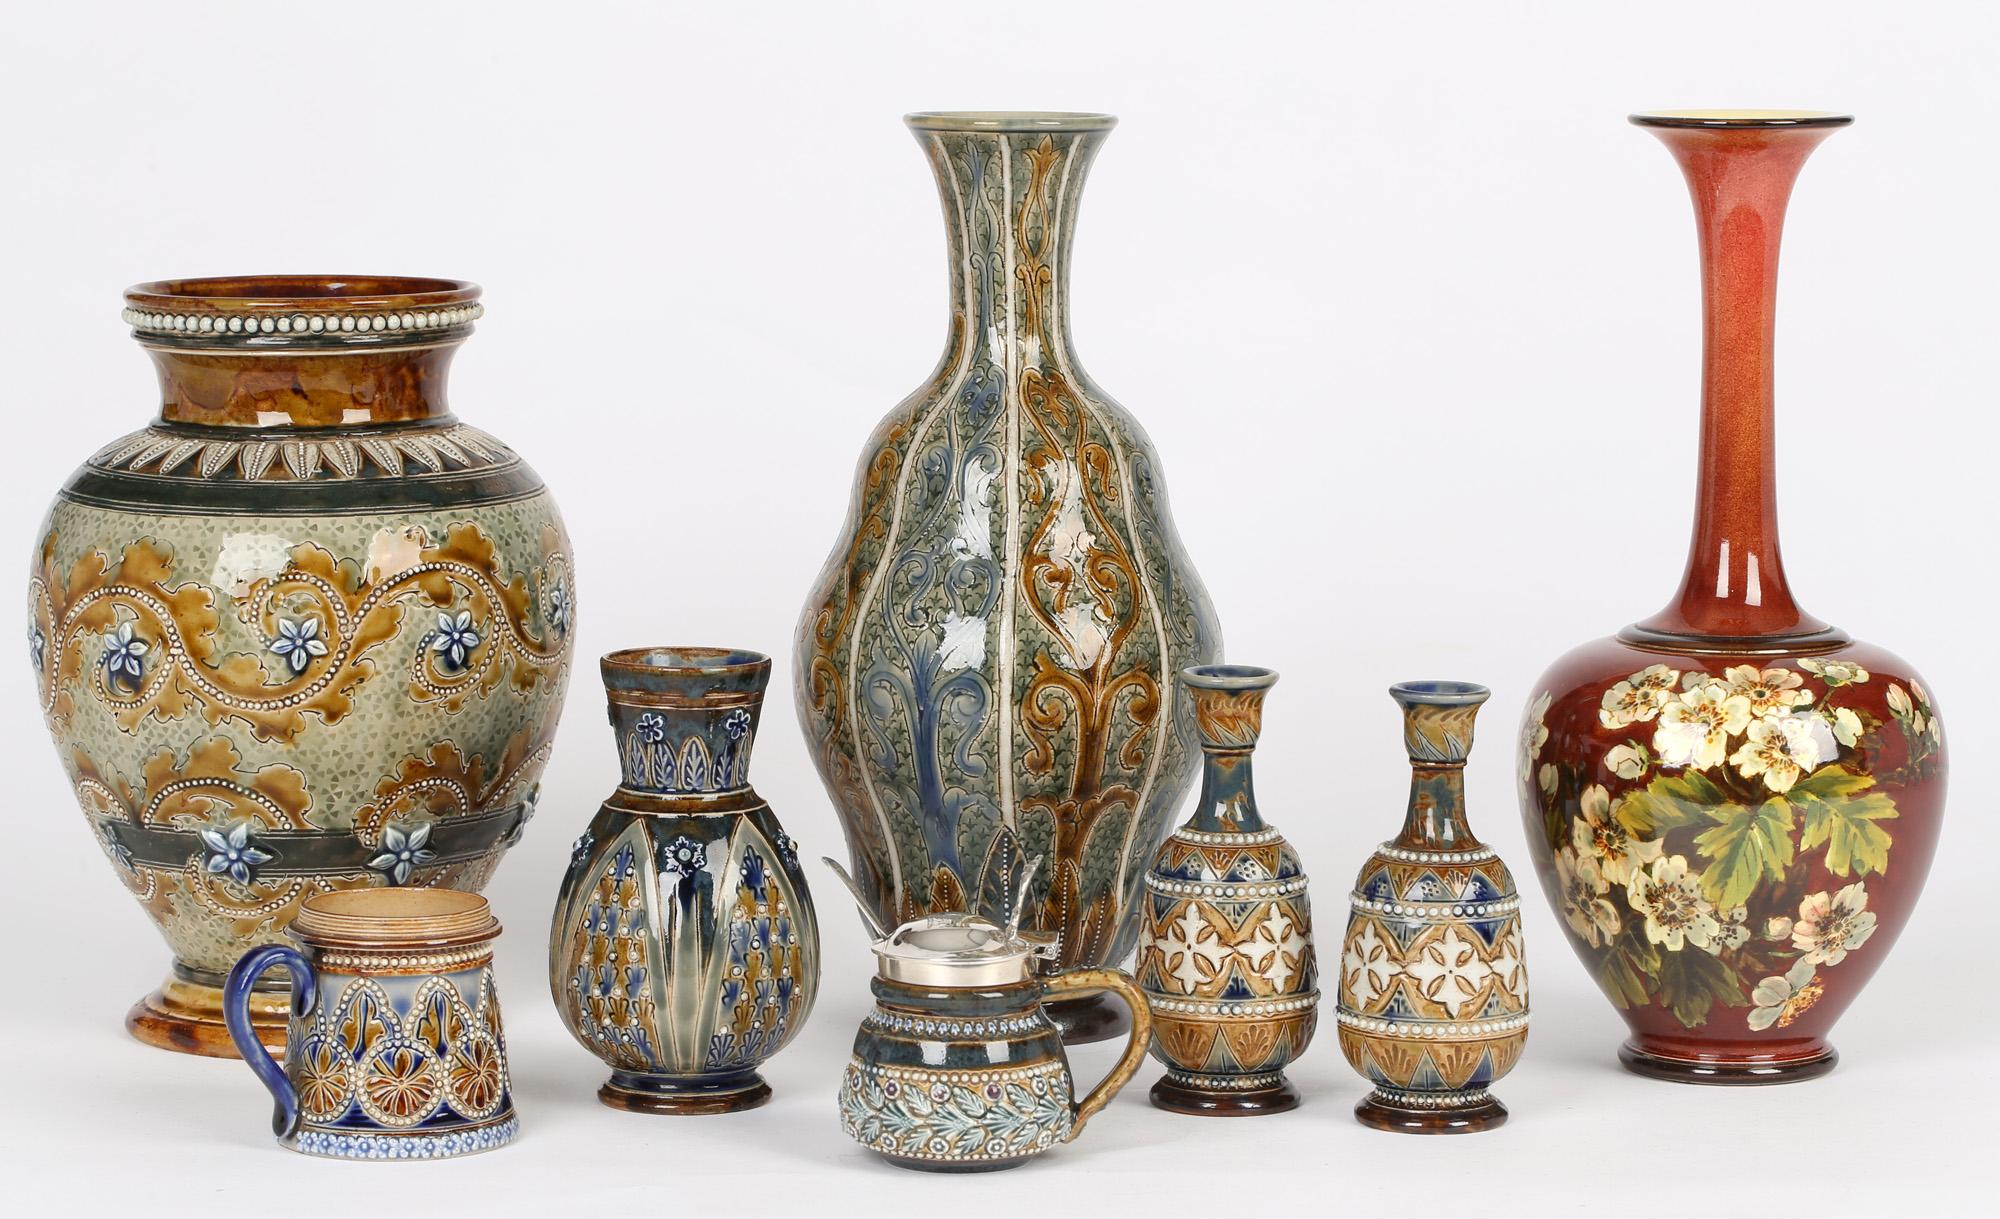 A good collection of British art pottery comprising of nine items as follows:

Thomas Smith Canal Potteries salt glazed jug with scratch design figures 1867-1894
Doulton Lambeth double gourd styled vase with floral style geometric designs by Eliza L